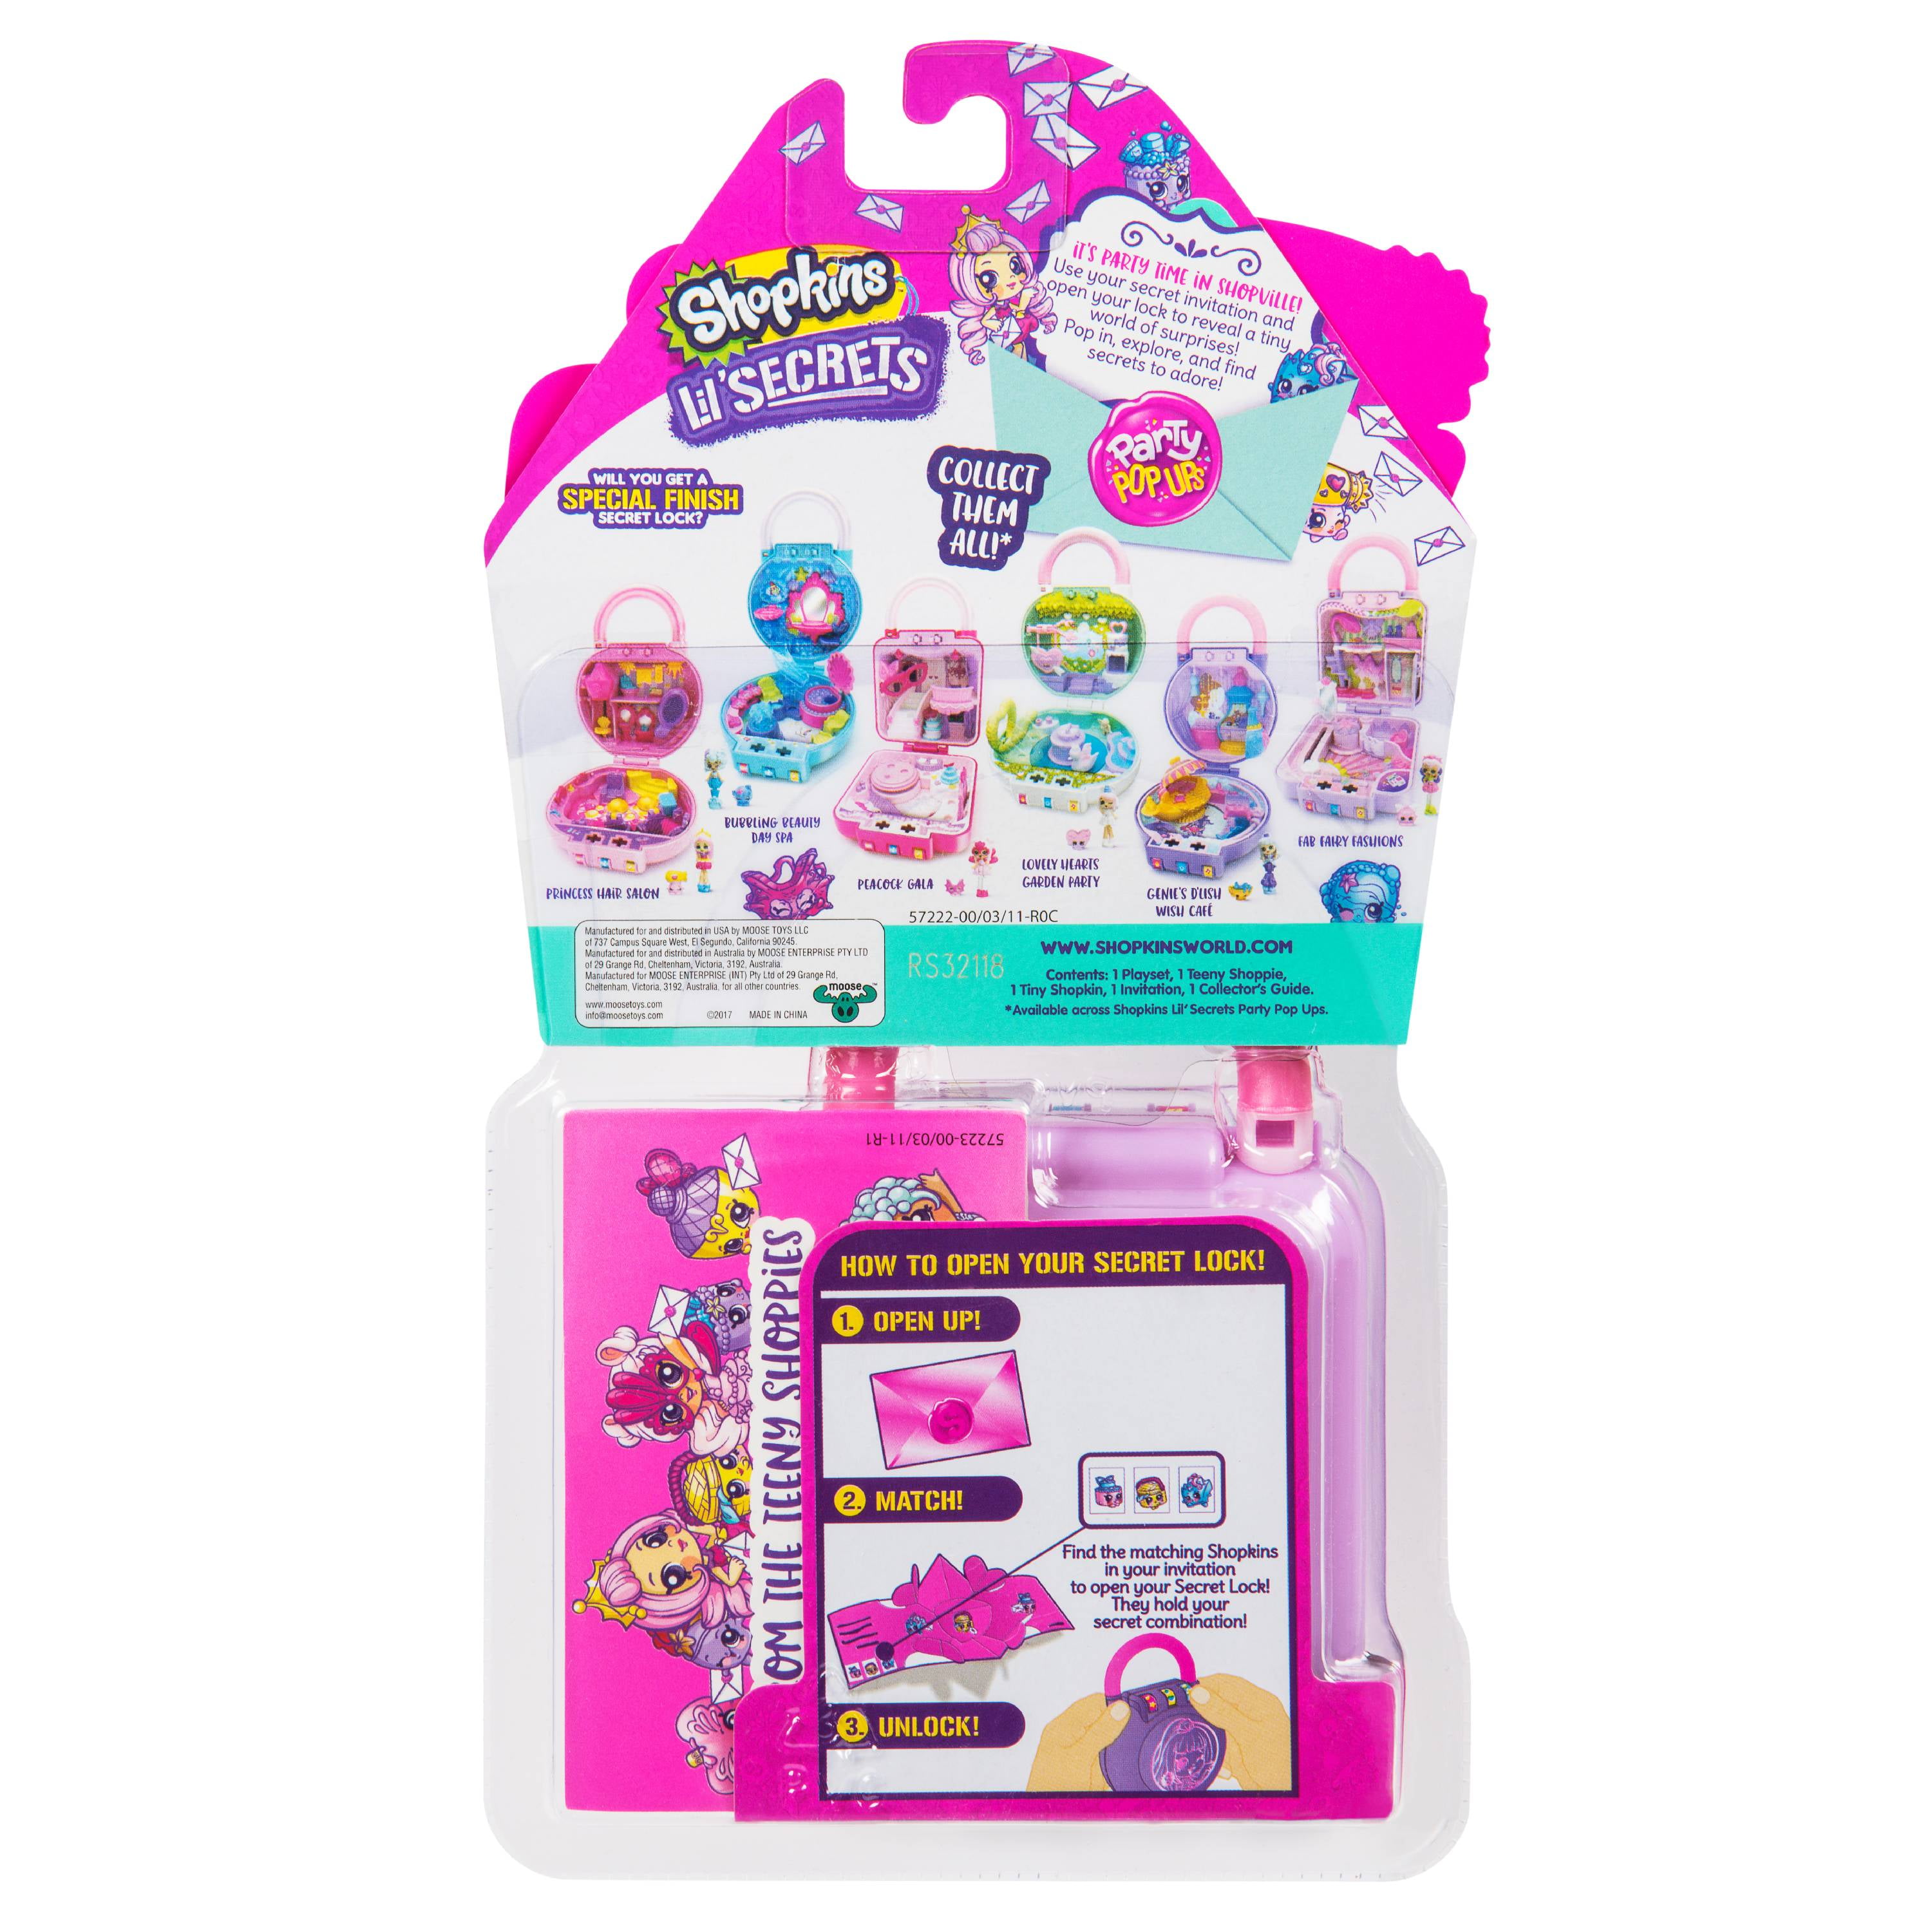 Shopkins, Toys, Shopkins Carry Case With Shopkins Included That Are Shown  Some Squinkies